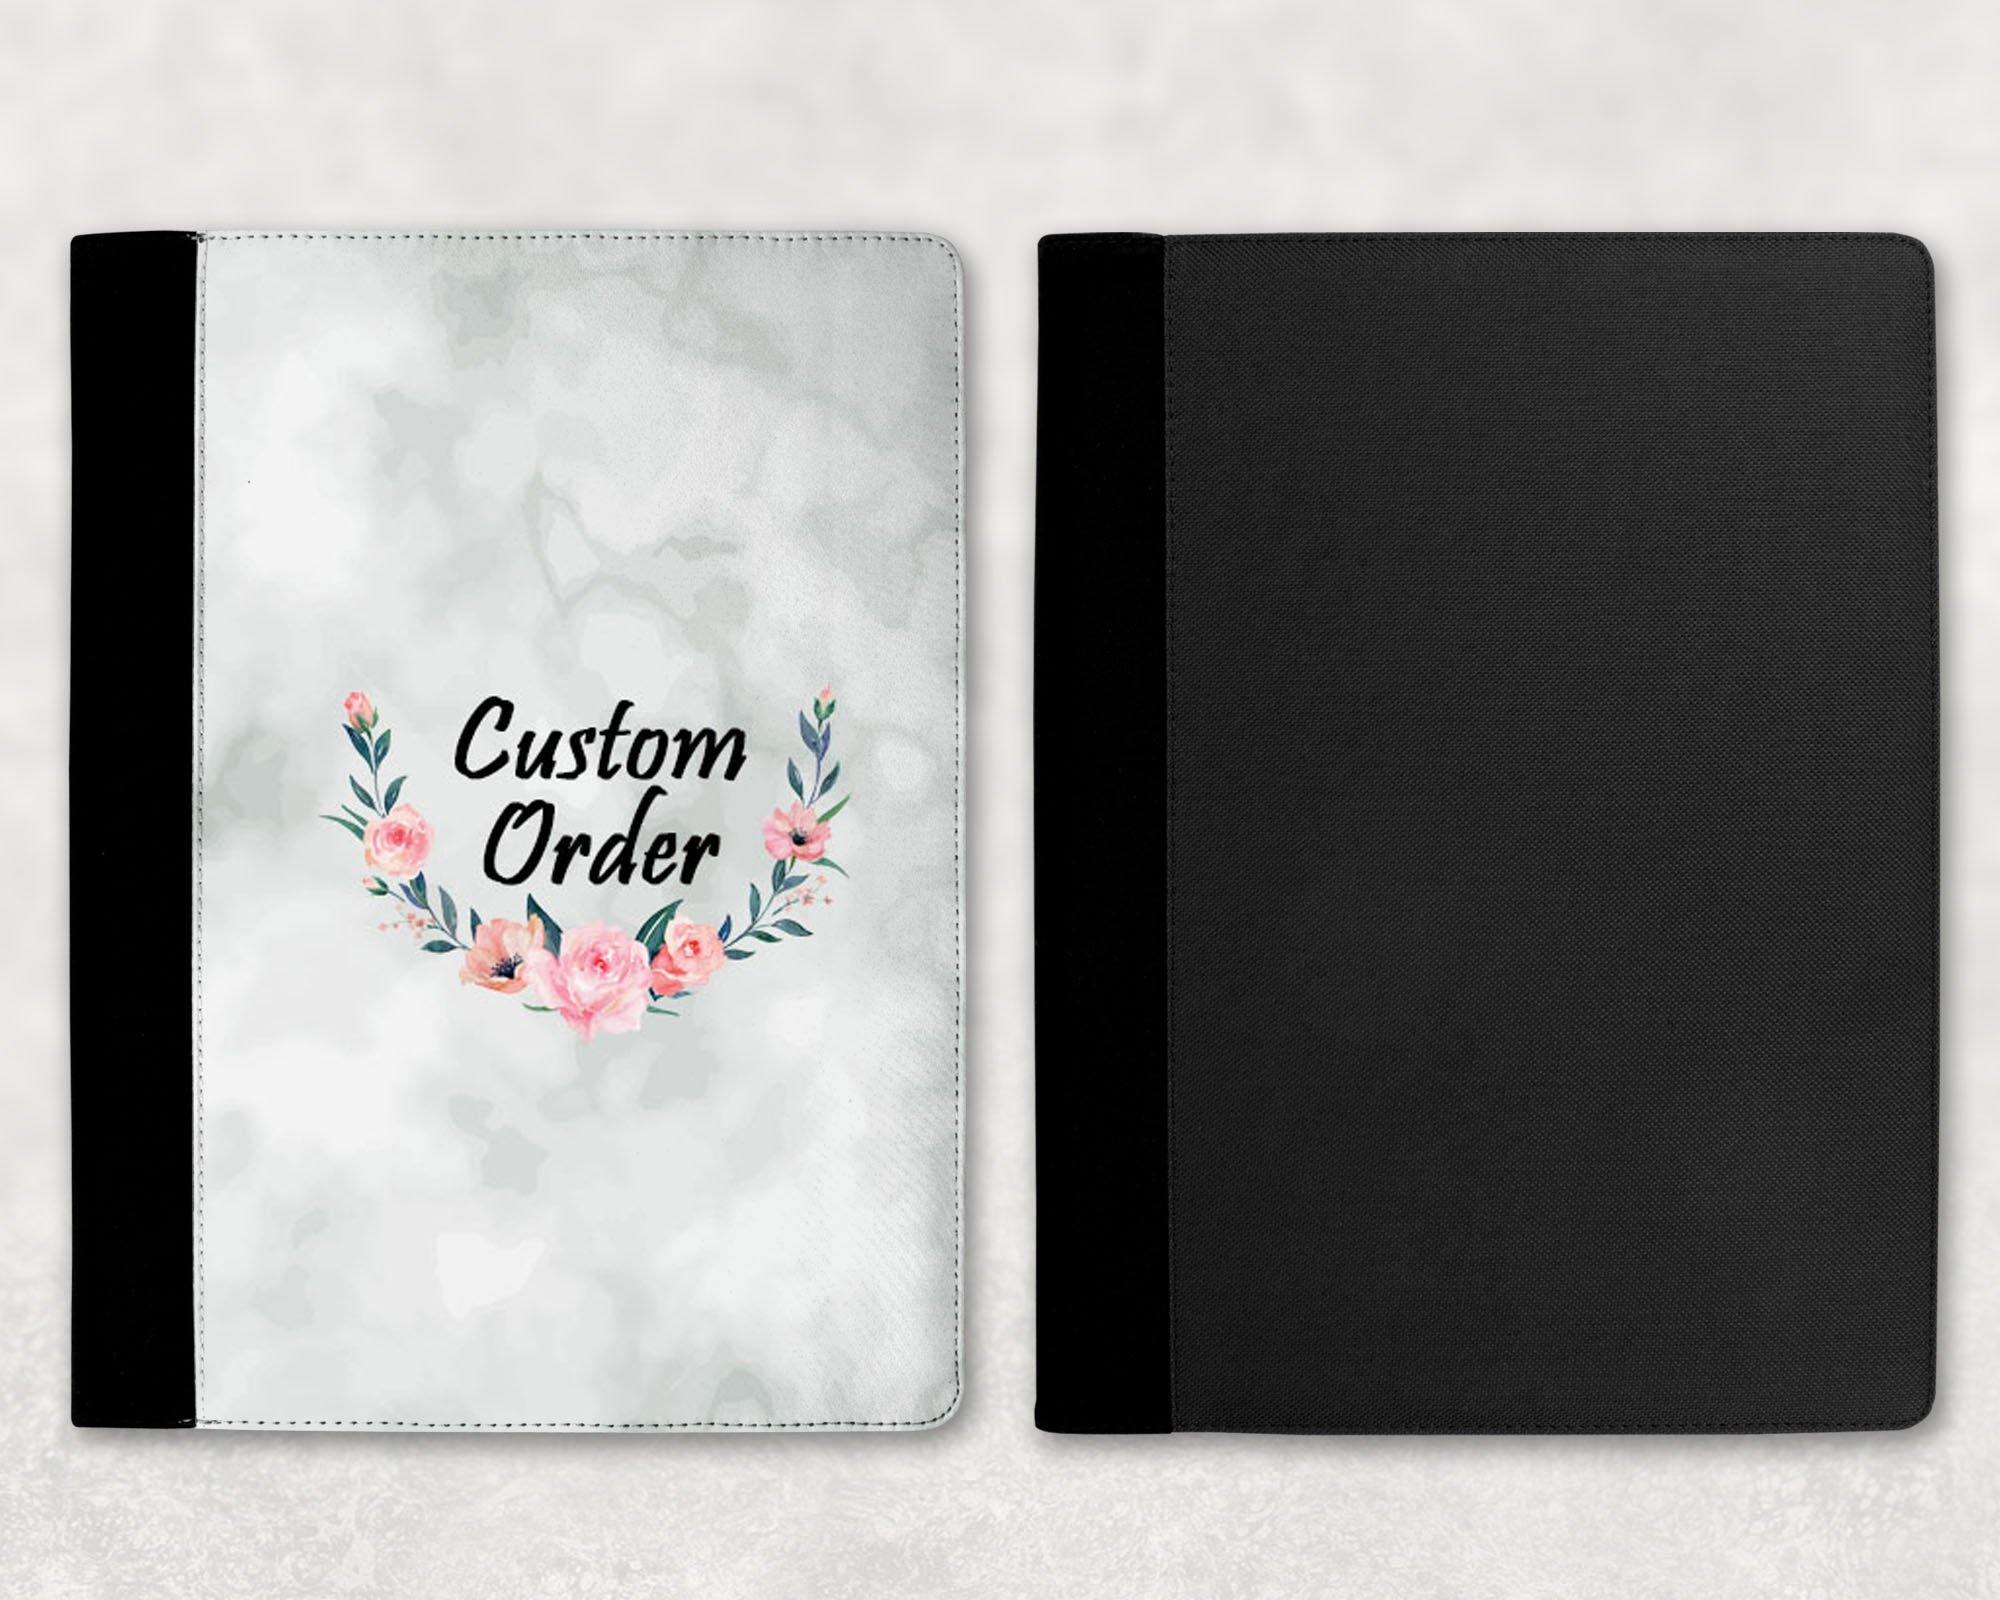 Customized Notebooks | Personalized Office Accessories | Personalized Journal | Custom Order - This & That Solutions - Customized Notebooks | Personalized Office Accessories | Personalized Journal | Custom Order - Personalized Gifts & Custom Home Decor